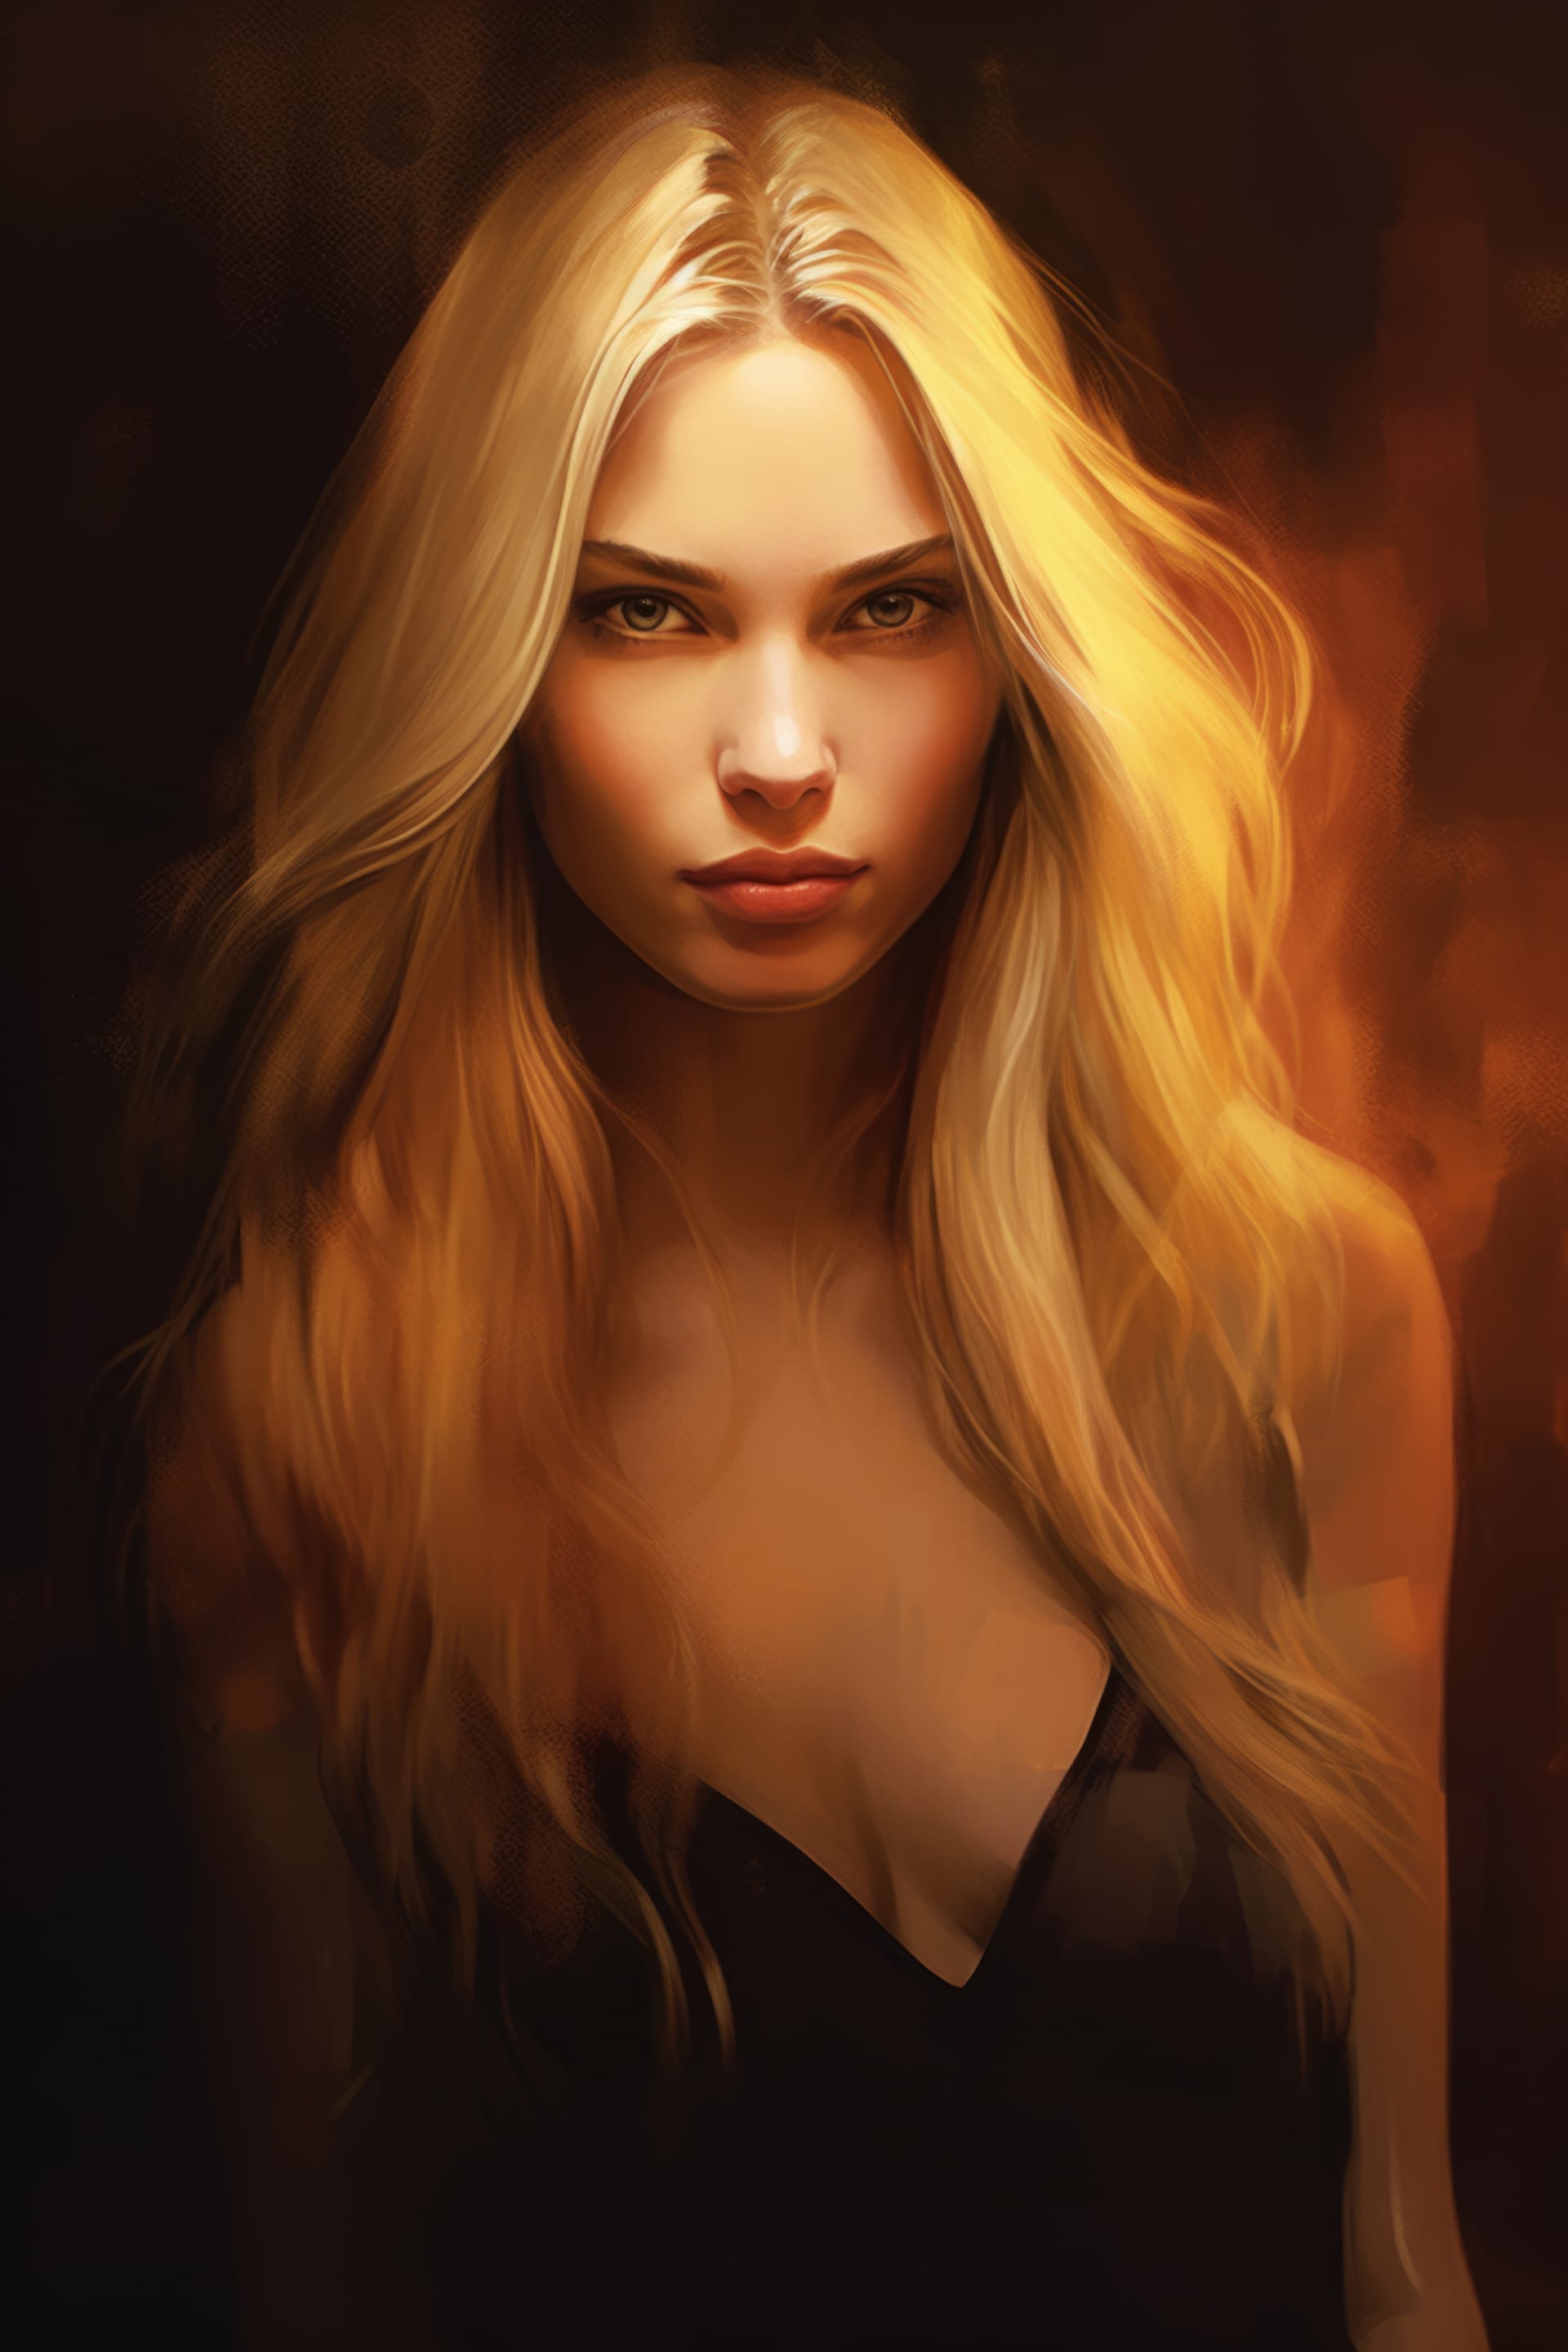 Best profile picture for facebook portrait woman with long blonde hair